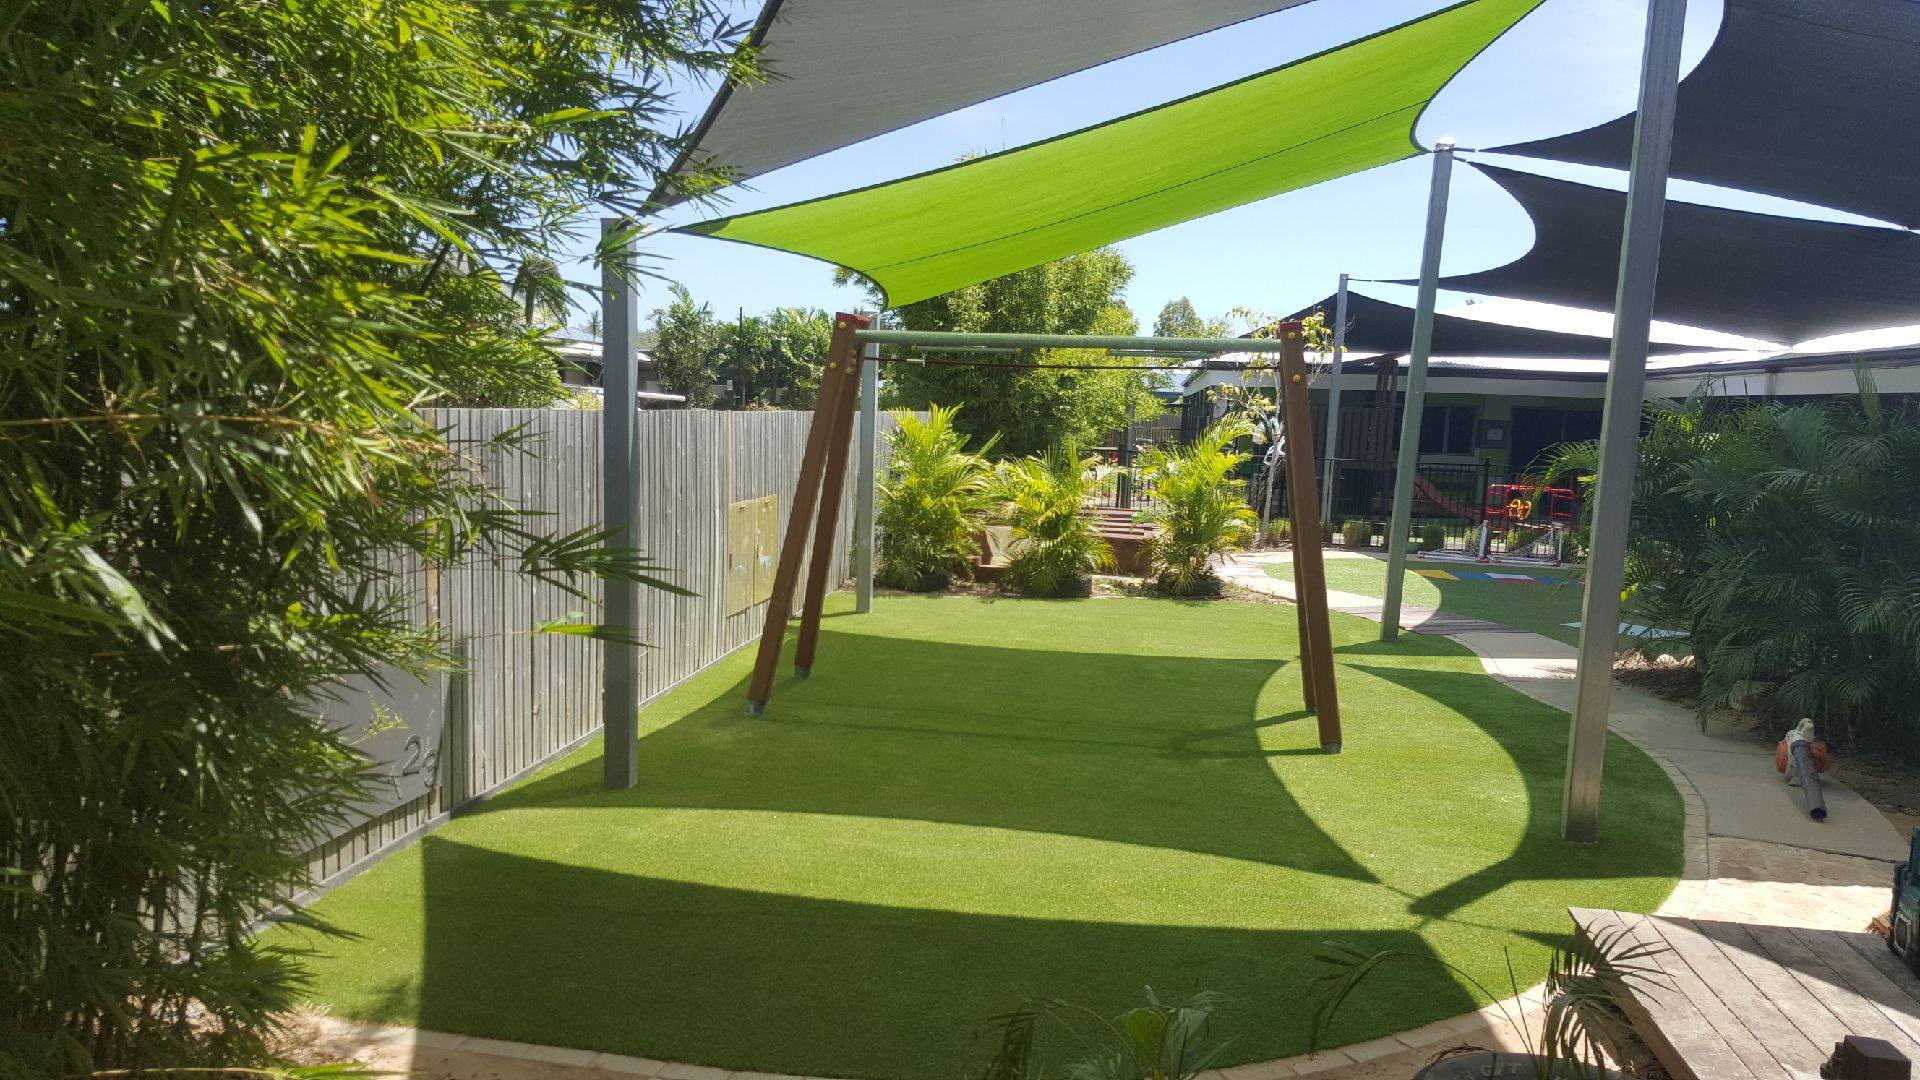 Synthetic Grass for Child Care